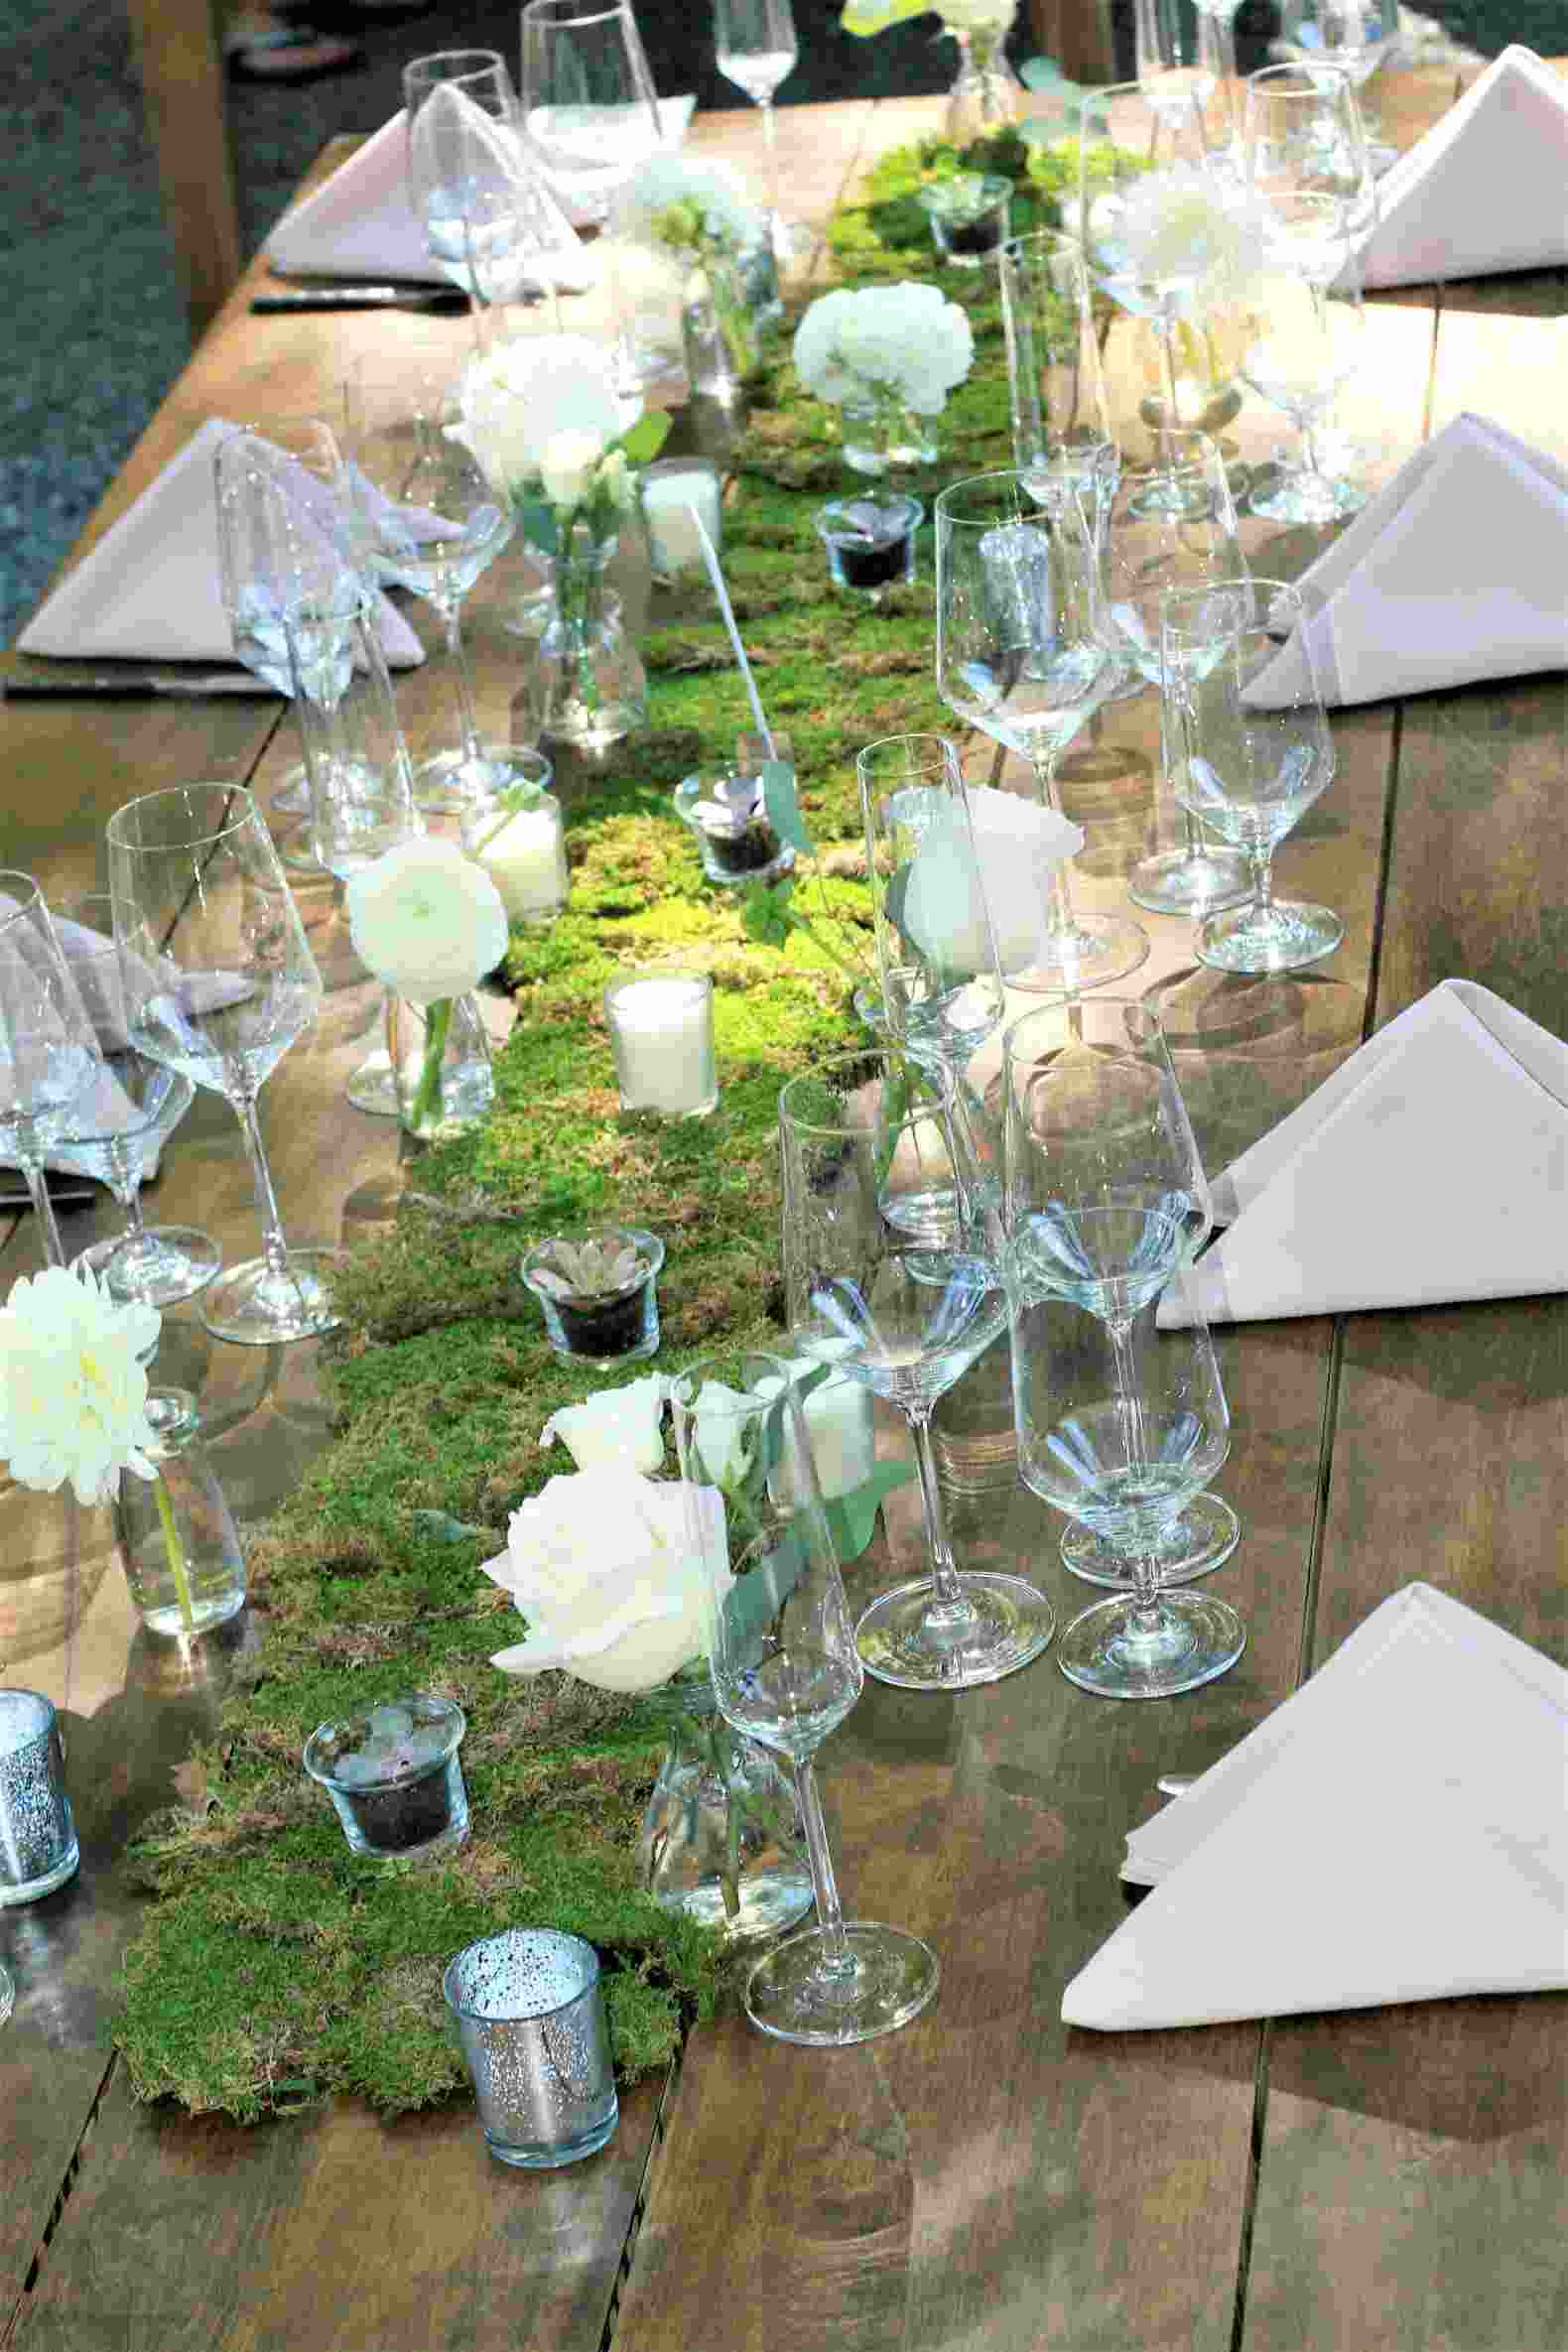 Make a table deco with moose wedding in the garden Decoideen for yourself